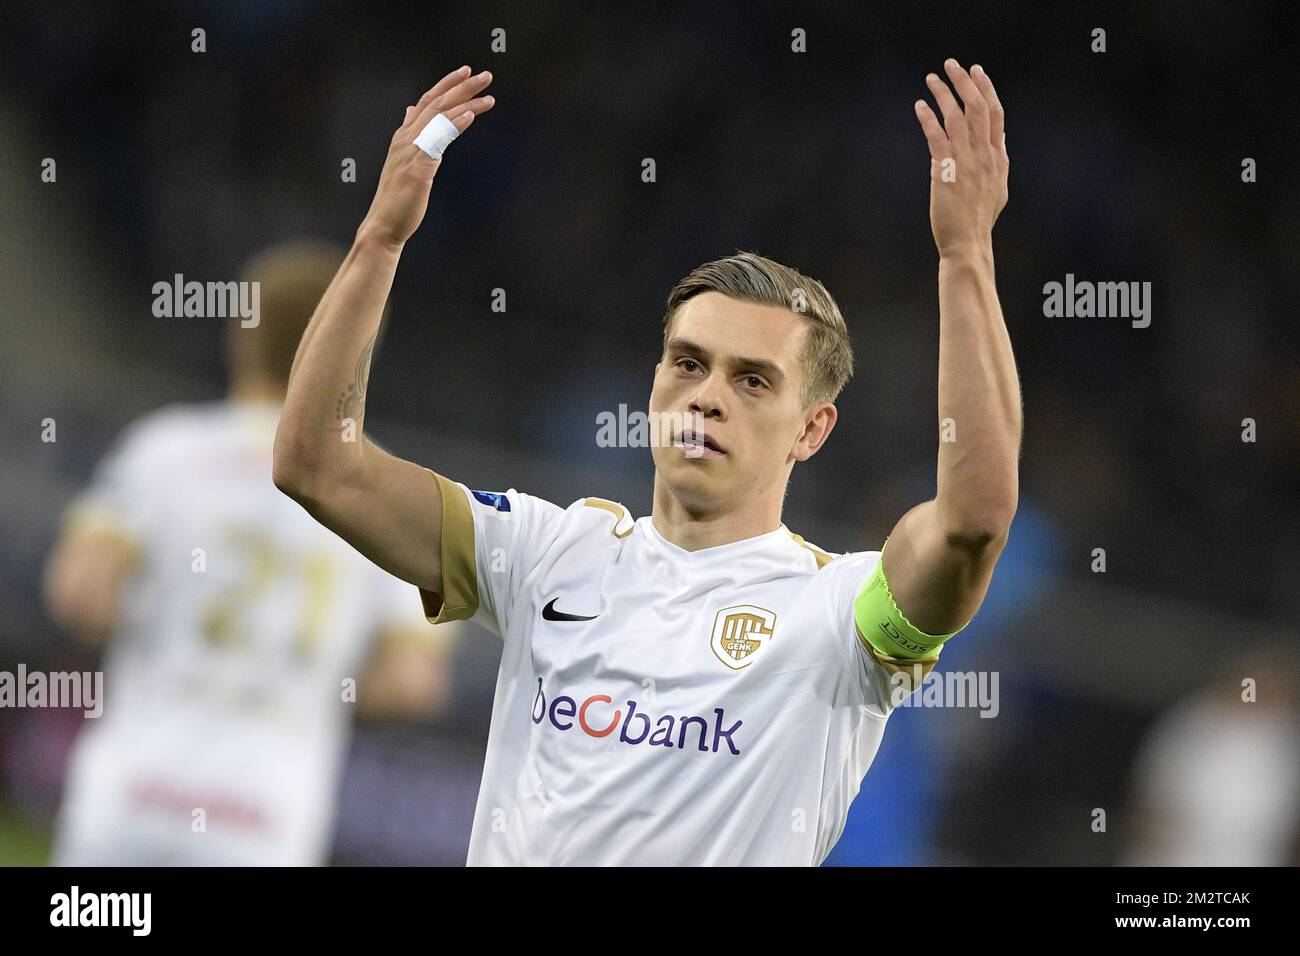 Genk's Leandro Trossard celebrates after scoring during a soccer match  between KAA Gent and KRC Genk, Saturday 27 April 2019 in Gent, on day 6 (out  of 10) of the Play-off 1